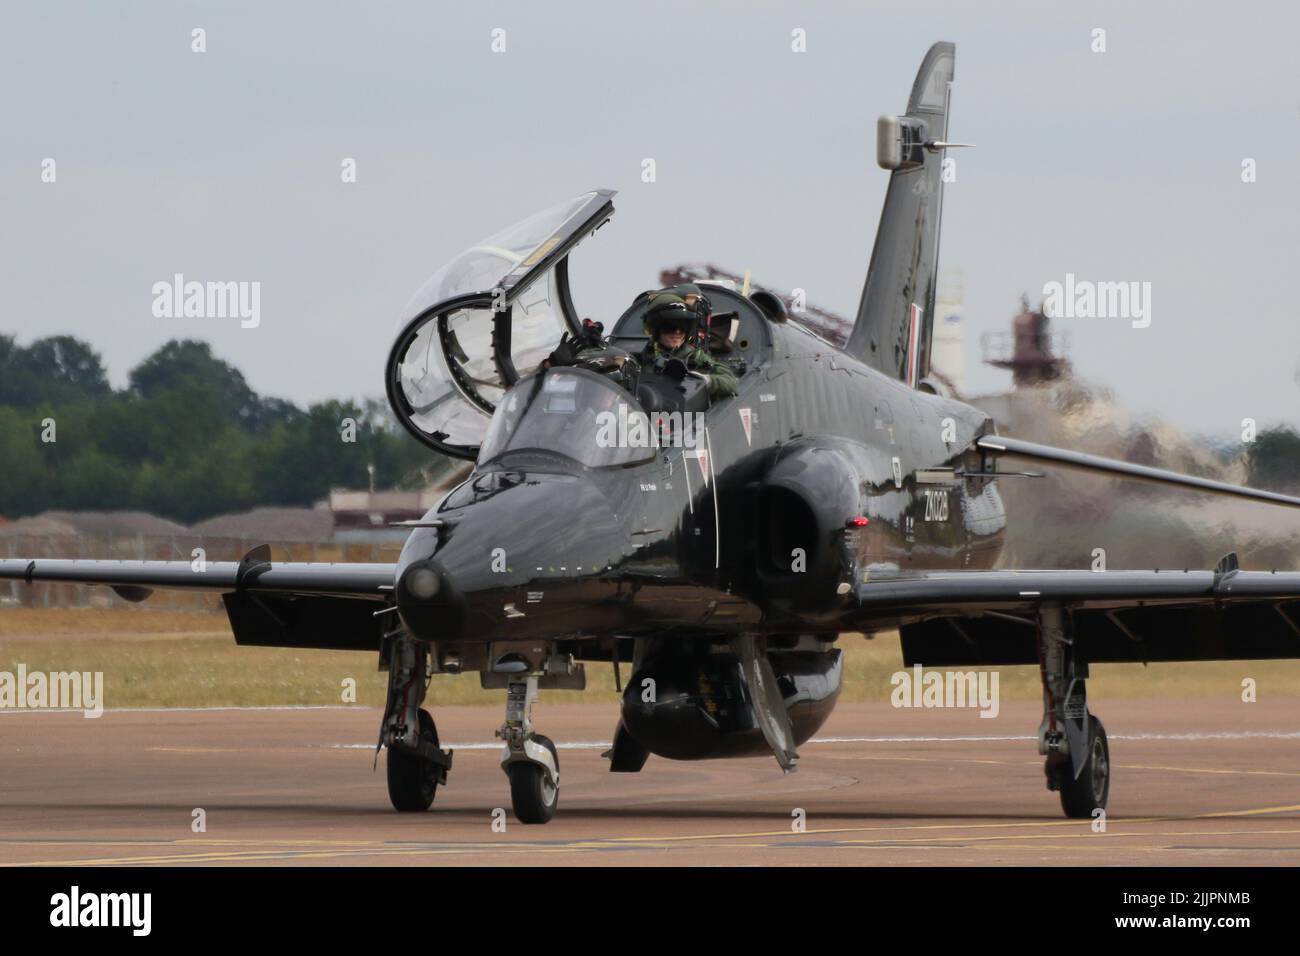 ZK028, a BAE Systems Hawk T2 operated by 25 Squadron, Royal Air Force, arriving at RAF Fairford in Gloucestershire, England, to participate in the Royal International Air Tattoo (RIAT) 2022. Stock Photo